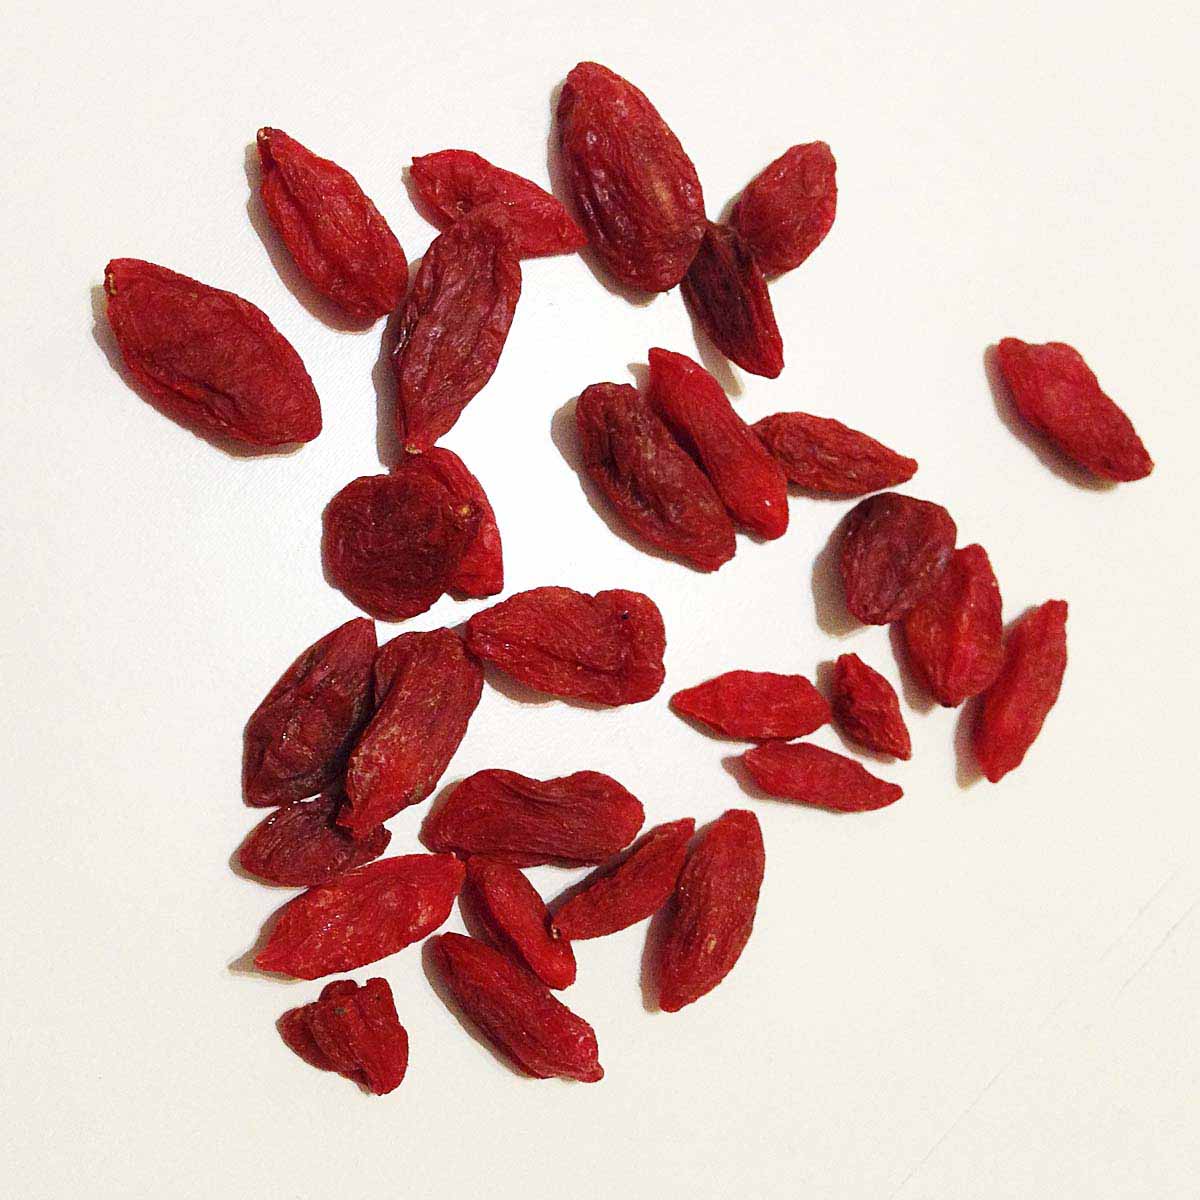 Dried goji berries laid out on white surface.